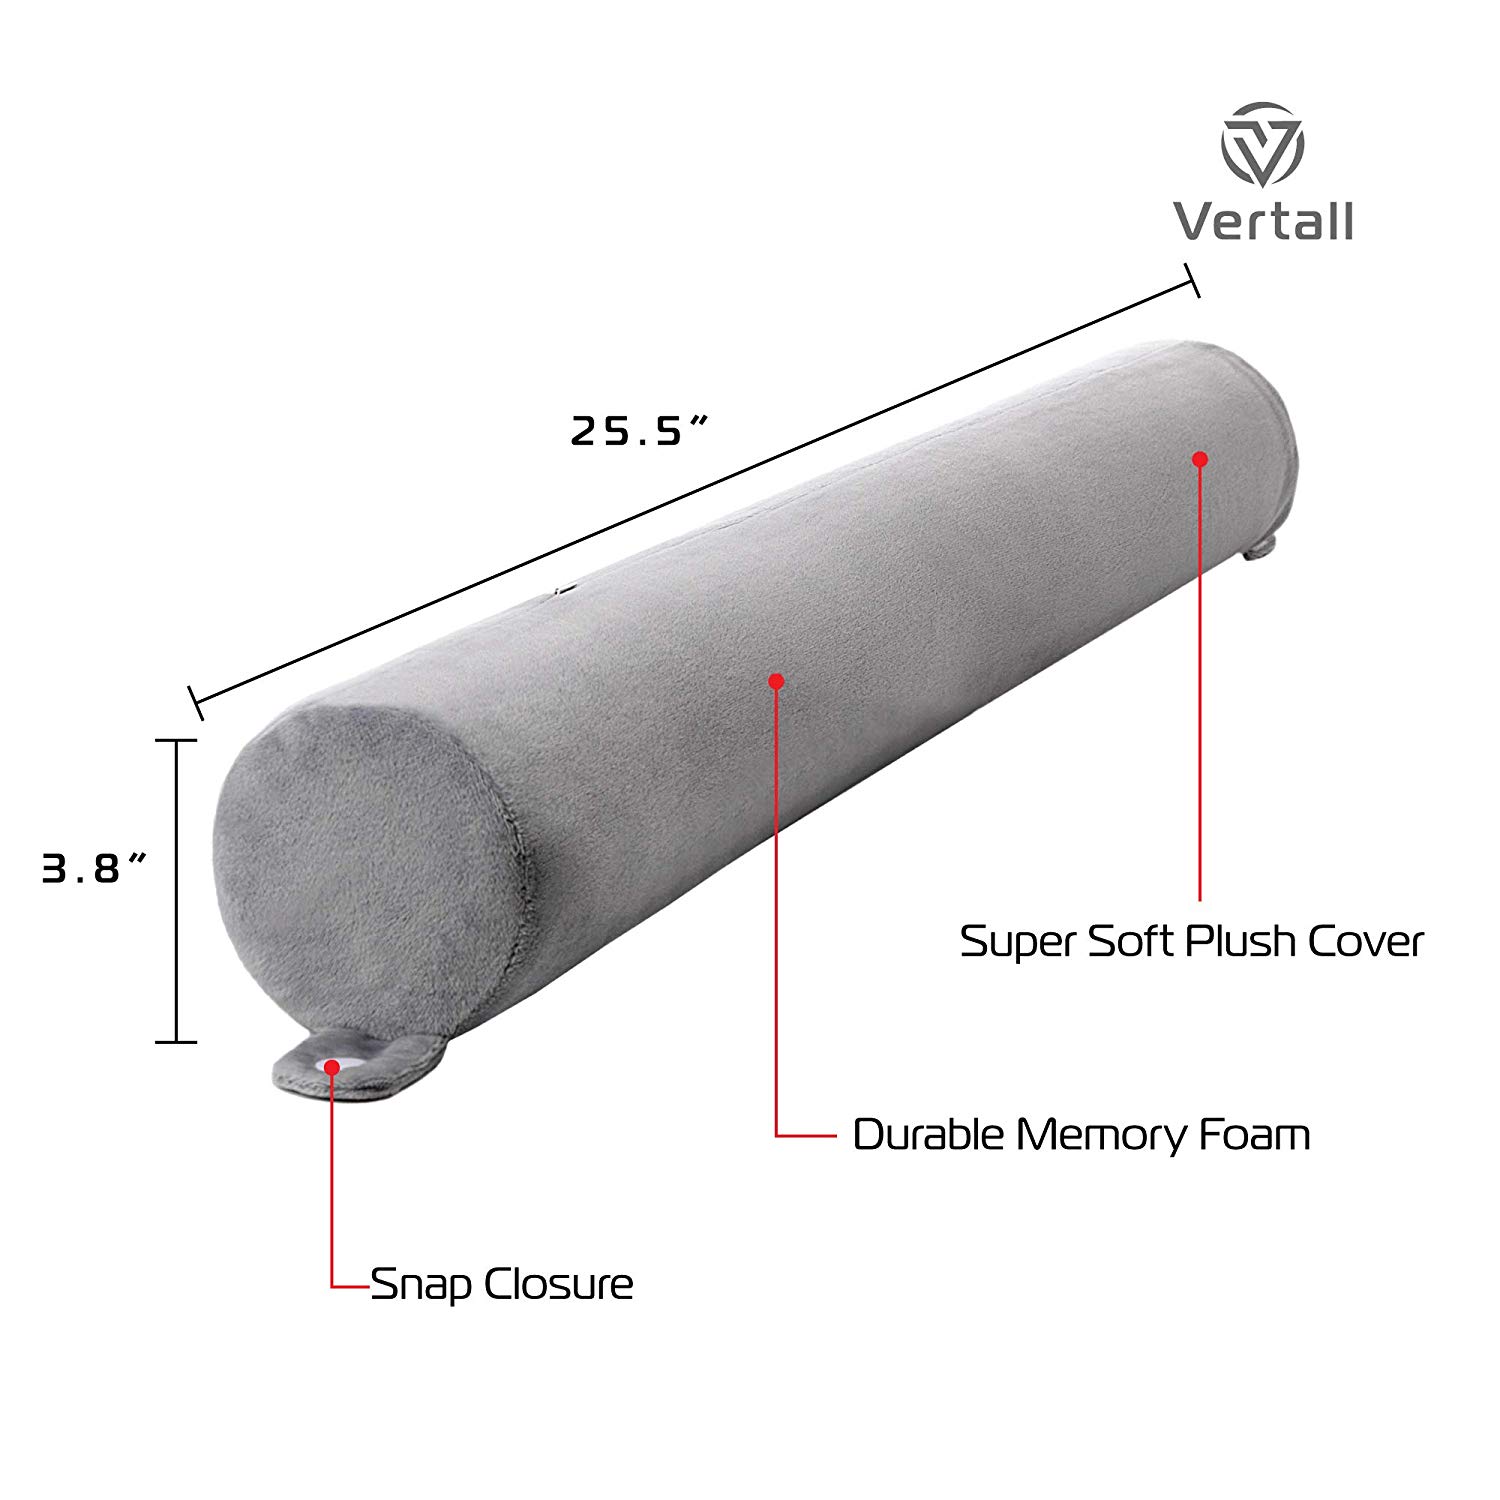 Travel Pillow Memory Foam Twist for Neck, Chin, Back, and Leg Support by Vertall - Comfortable, Lightweight and Adjustable with Machine Washable Cover -Gray - image 2 of 5